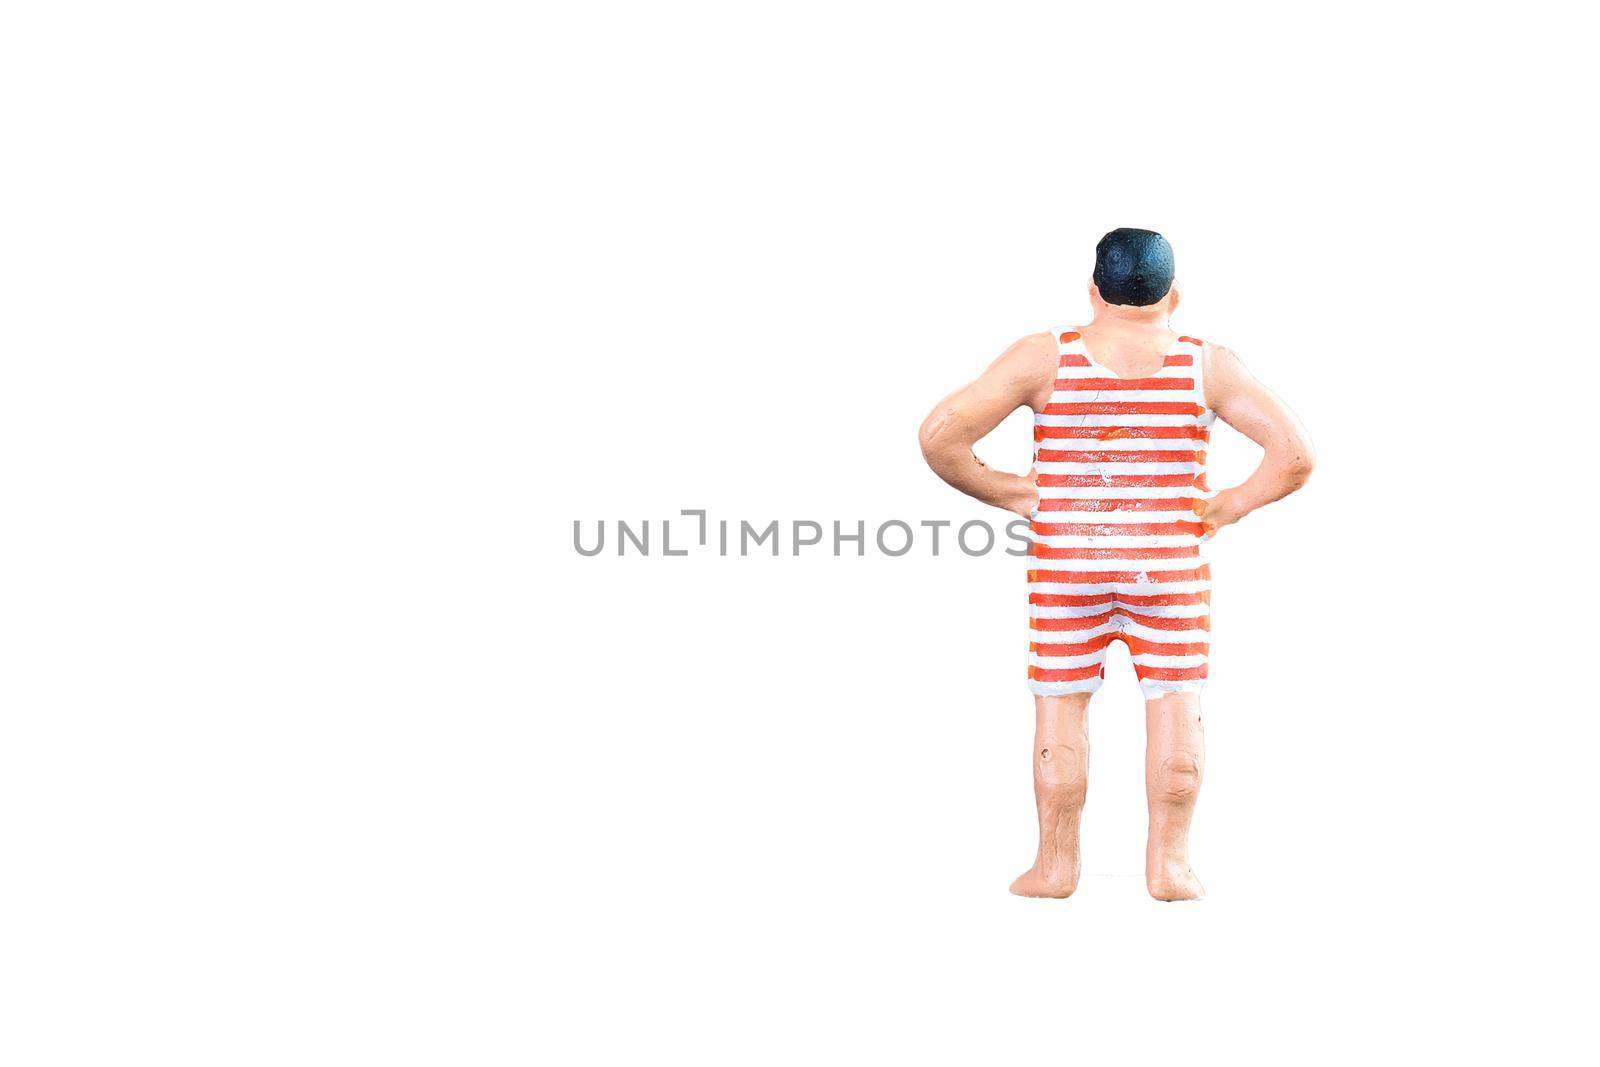 Close up of Miniature fat people isolated with clipping path on white background. Elegant Design with copy space for placement your text, mock up for travel concept.